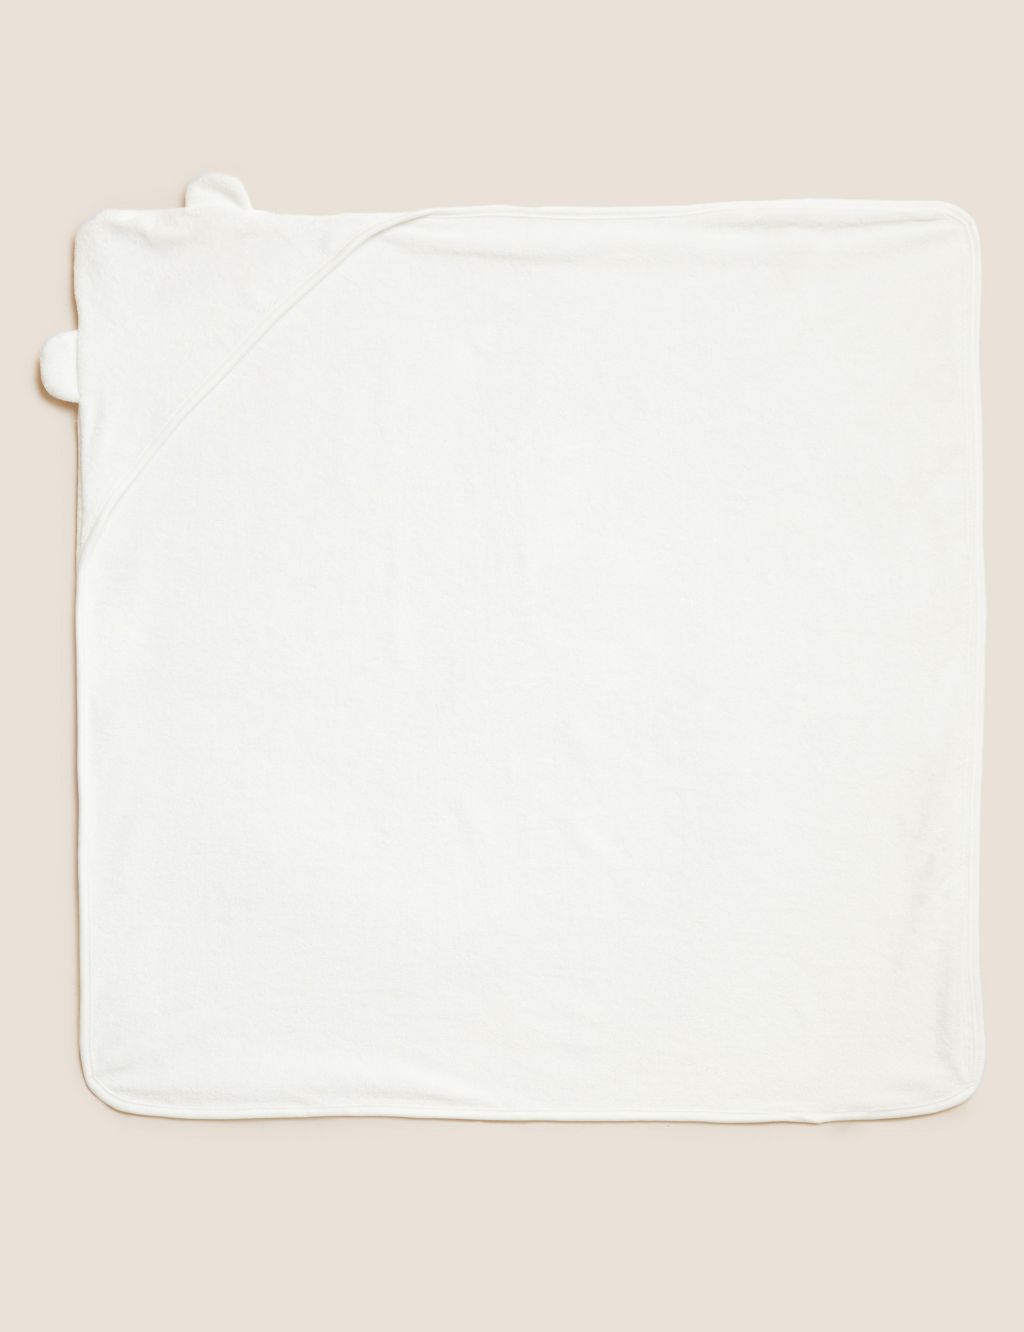 Cotton Rich Hooded Towel image 1